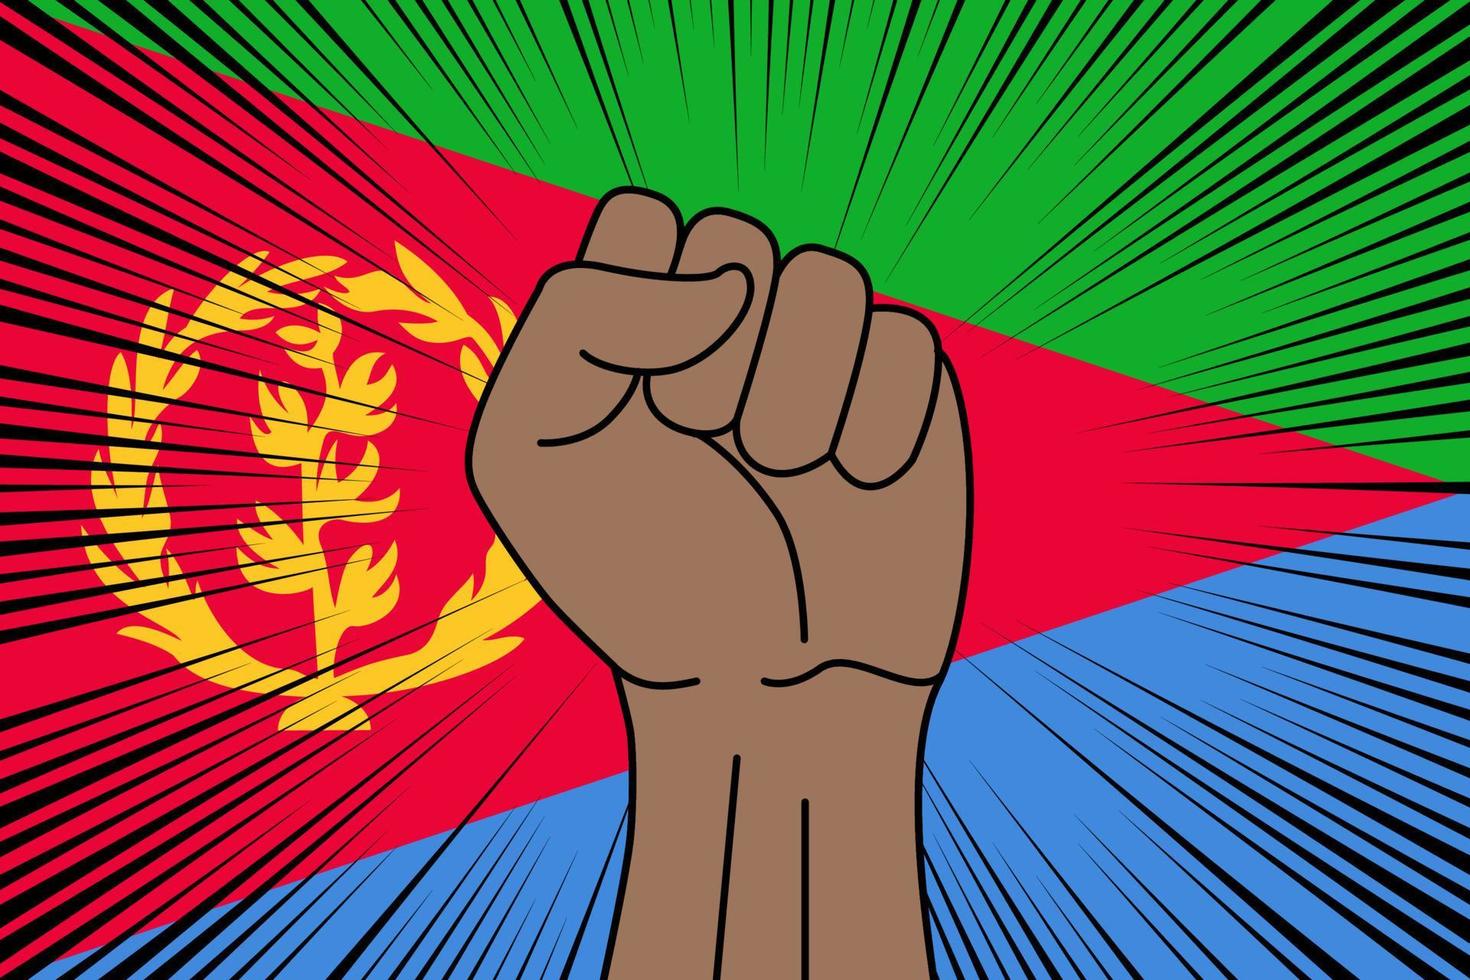 Human fist clenched symbol on flag of Eritrea vector